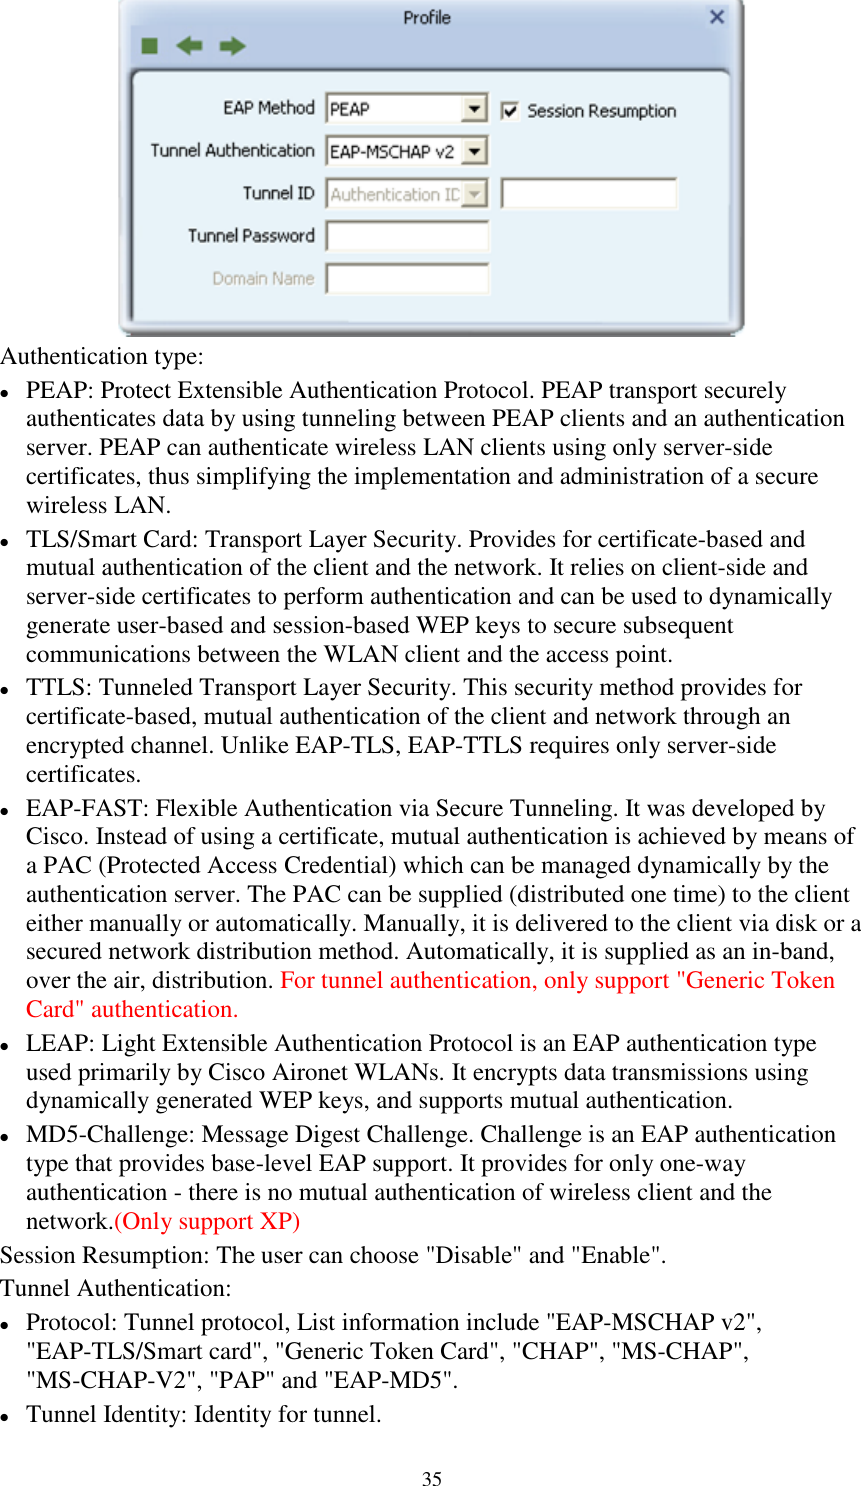 35Authentication type:PEAP: Protect Extensible Authentication Protocol. PEAP transport securelyauthenticates data by using tunneling between PEAP clients and an authenticationserver. PEAP can authenticate wireless LAN clients using only server-sidecertificates, thus simplifying the implementation and administration of a securewireless LAN.TLS/Smart Card: Transport Layer Security. Provides for certificate-based andmutual authentication of the client and the network. It relies on client-side andserver-side certificates to perform authentication and can be used to dynamicallygenerate user-based and session-based WEP keys to secure subsequentcommunications between the WLAN client and the access point.TTLS: Tunneled Transport Layer Security. This security method provides forcertificate-based, mutual authentication of the client and network through anencrypted channel. Unlike EAP-TLS, EAP-TTLS requires only server-sidecertificates.EAP-FAST: Flexible Authentication via Secure Tunneling. It was developed byCisco. Instead of using a certificate, mutual authentication is achieved by means ofa PAC (Protected Access Credential) which can be managed dynamically by theauthentication server. The PAC can be supplied (distributed one time) to the clienteither manually or automatically. Manually, it is delivered to the client via disk or asecured network distribution method. Automatically, it is supplied as an in-band,over the air, distribution. For tunnel authentication, only support &quot;Generic TokenCard&quot; authentication.LEAP: Light Extensible Authentication Protocol is an EAP authentication typeused primarily by Cisco Aironet WLANs. It encrypts data transmissions usingdynamically generated WEP keys, and supports mutual authentication.MD5-Challenge: Message Digest Challenge. Challenge is an EAP authenticationtype that provides base-level EAP support. It provides for only one-wayauthentication - there is no mutual authentication of wireless client and thenetwork.(Only support XP)Session Resumption: The user can choose &quot;Disable&quot; and &quot;Enable&quot;.Tunnel Authentication:Protocol: Tunnel protocol, List information include &quot;EAP-MSCHAP v2&quot;,&quot;EAP-TLS/Smart card&quot;, &quot;Generic Token Card&quot;, &quot;CHAP&quot;, &quot;MS-CHAP&quot;,&quot;MS-CHAP-V2&quot;, &quot;PAP&quot; and &quot;EAP-MD5&quot;.Tunnel Identity: Identity for tunnel.